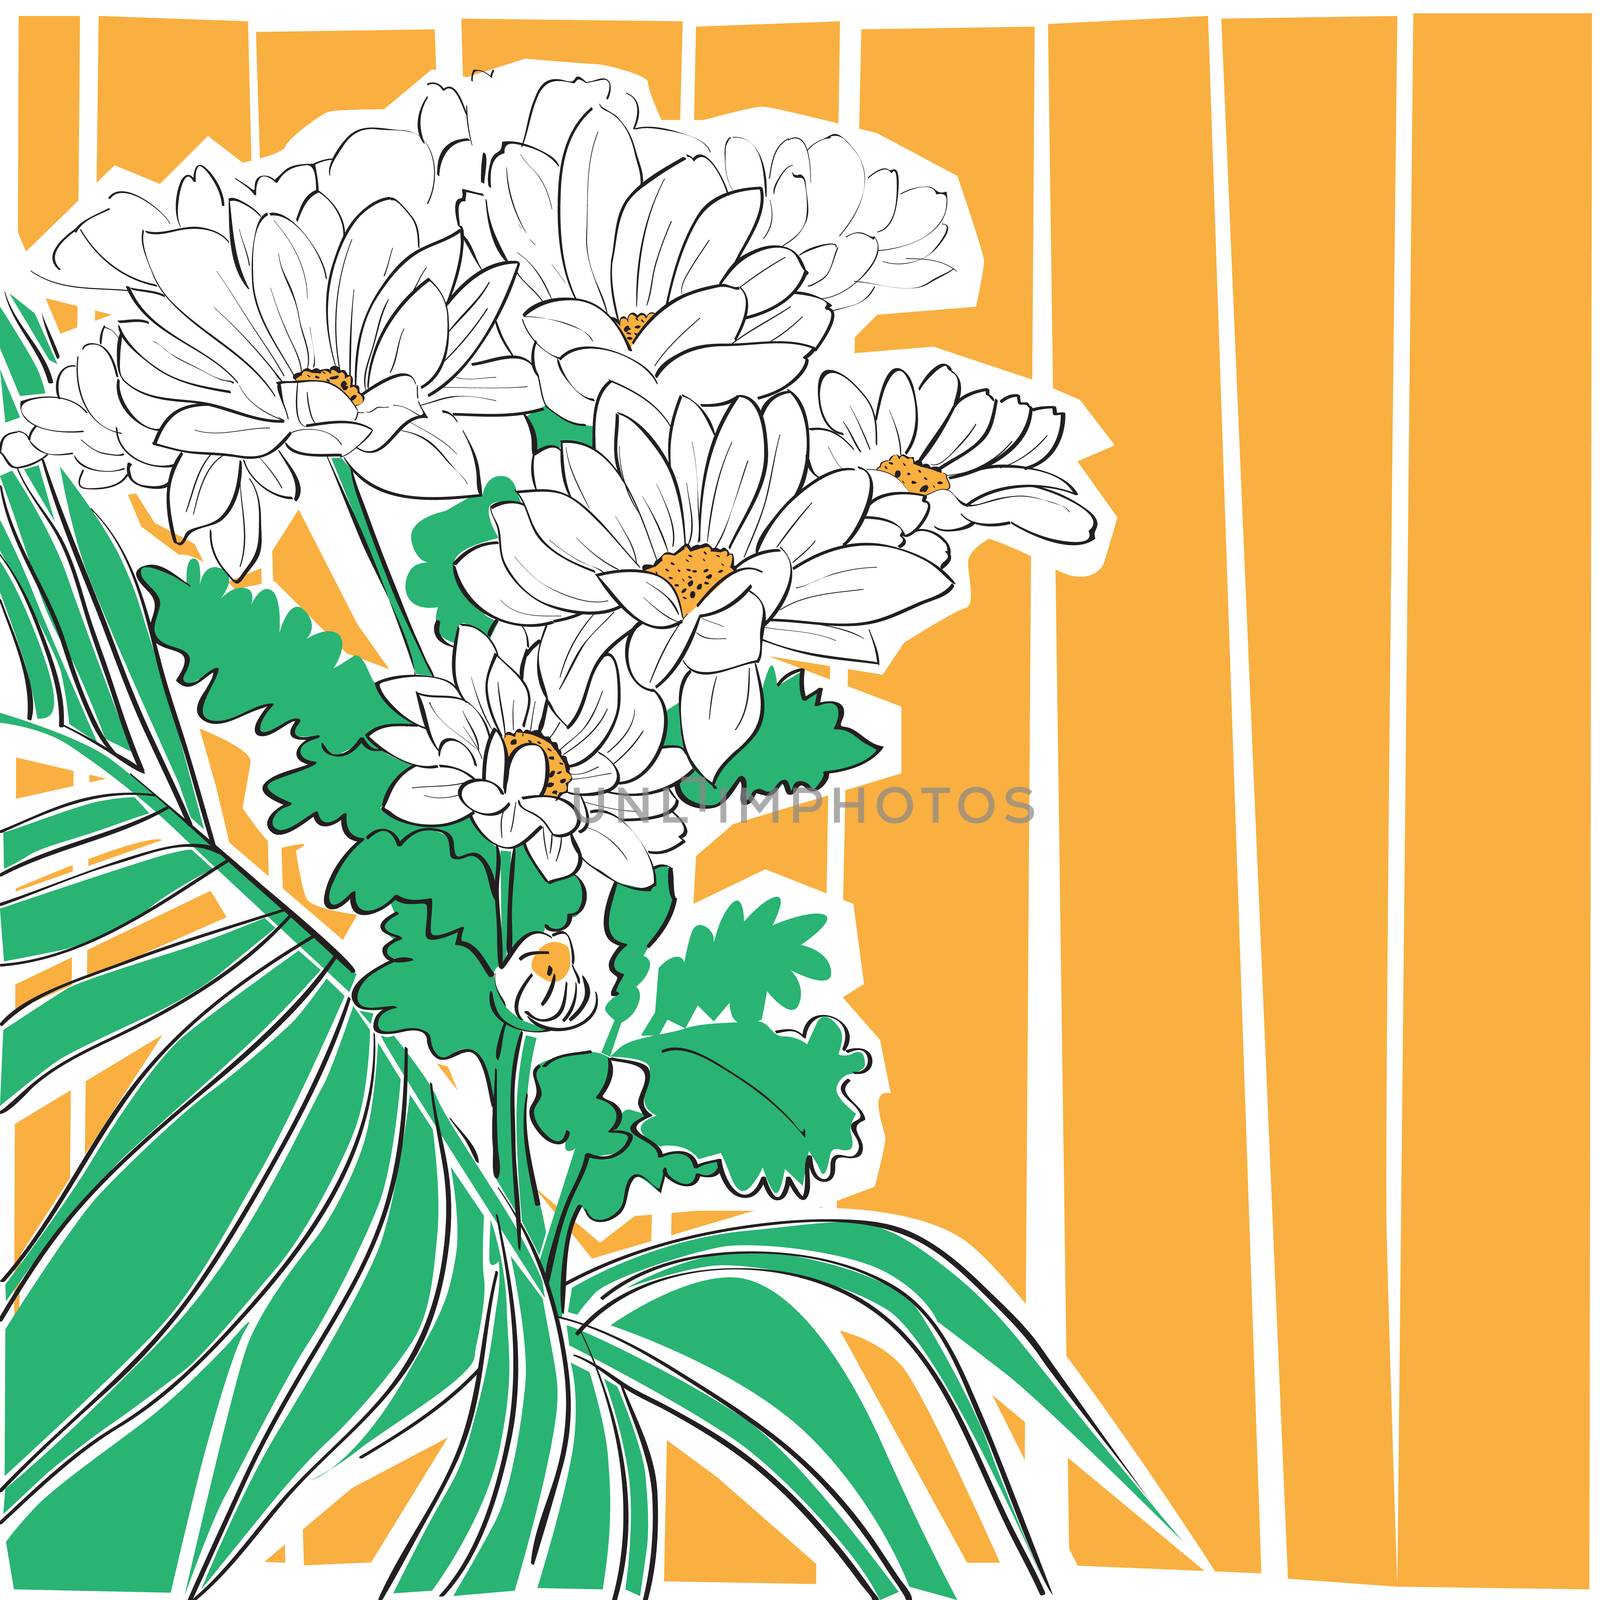 Spring flowers card, hand drawn illustration of a cutout daisies bouquet over a striped backgound